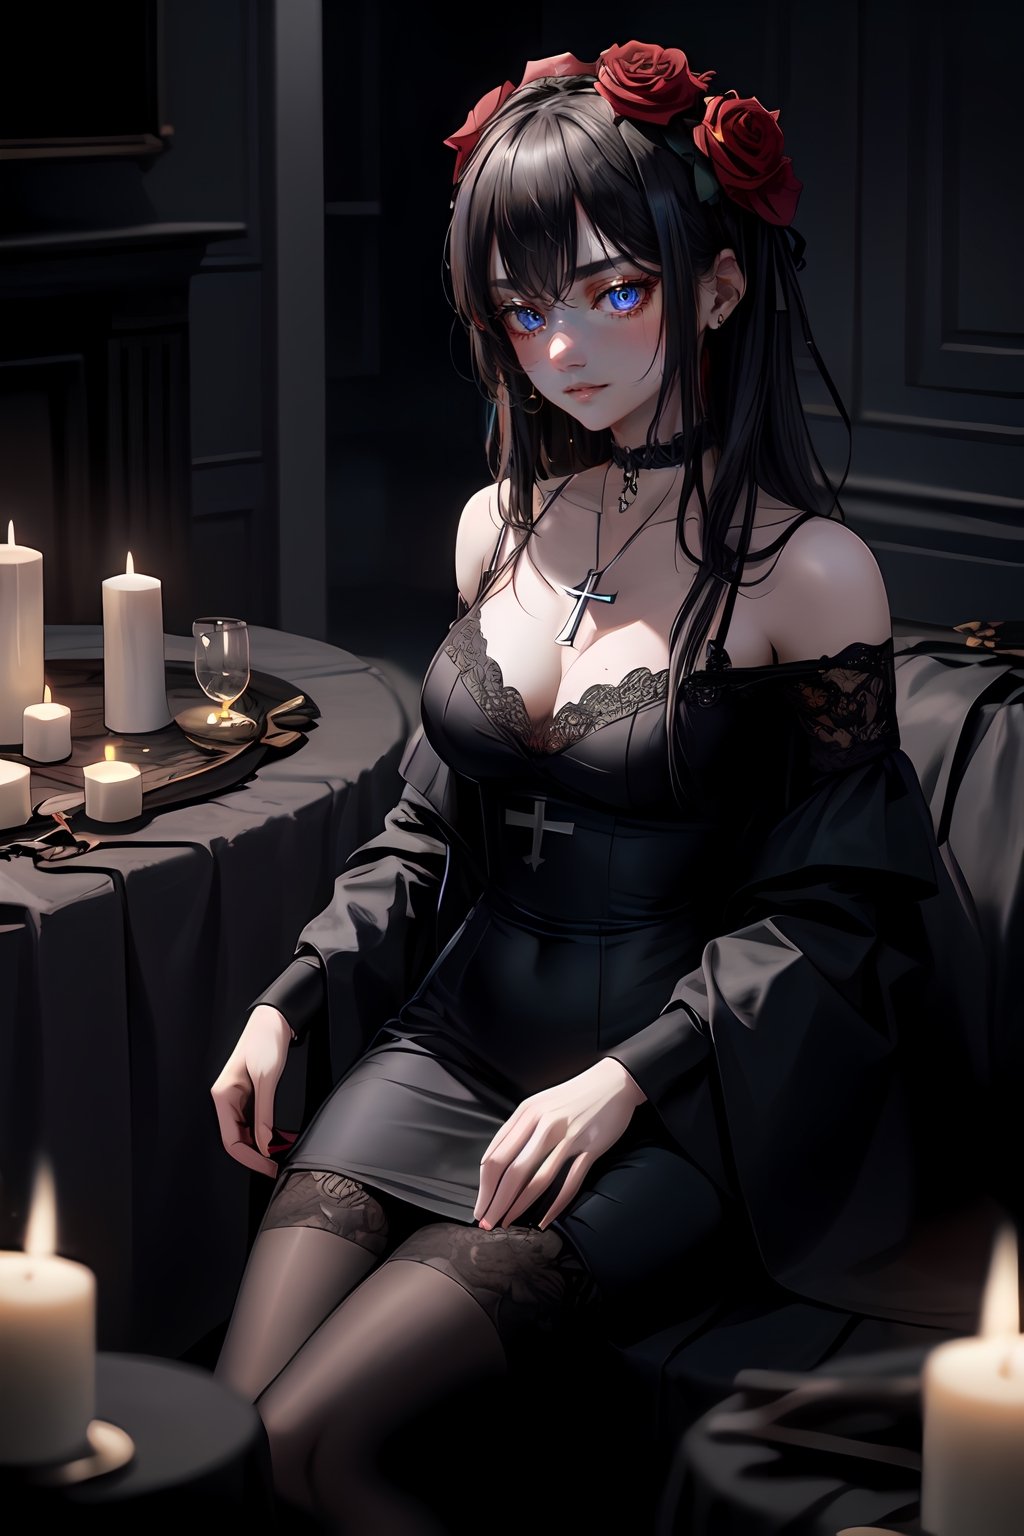 A lonely goth girl surrounded by flames and darkness. She sits in a pentagram made of roses and candles, her eyes closed and her lips parted. She wears a black dress and a choker with a cross pendant. The room is empty and dark, except for the flickering light of the candles